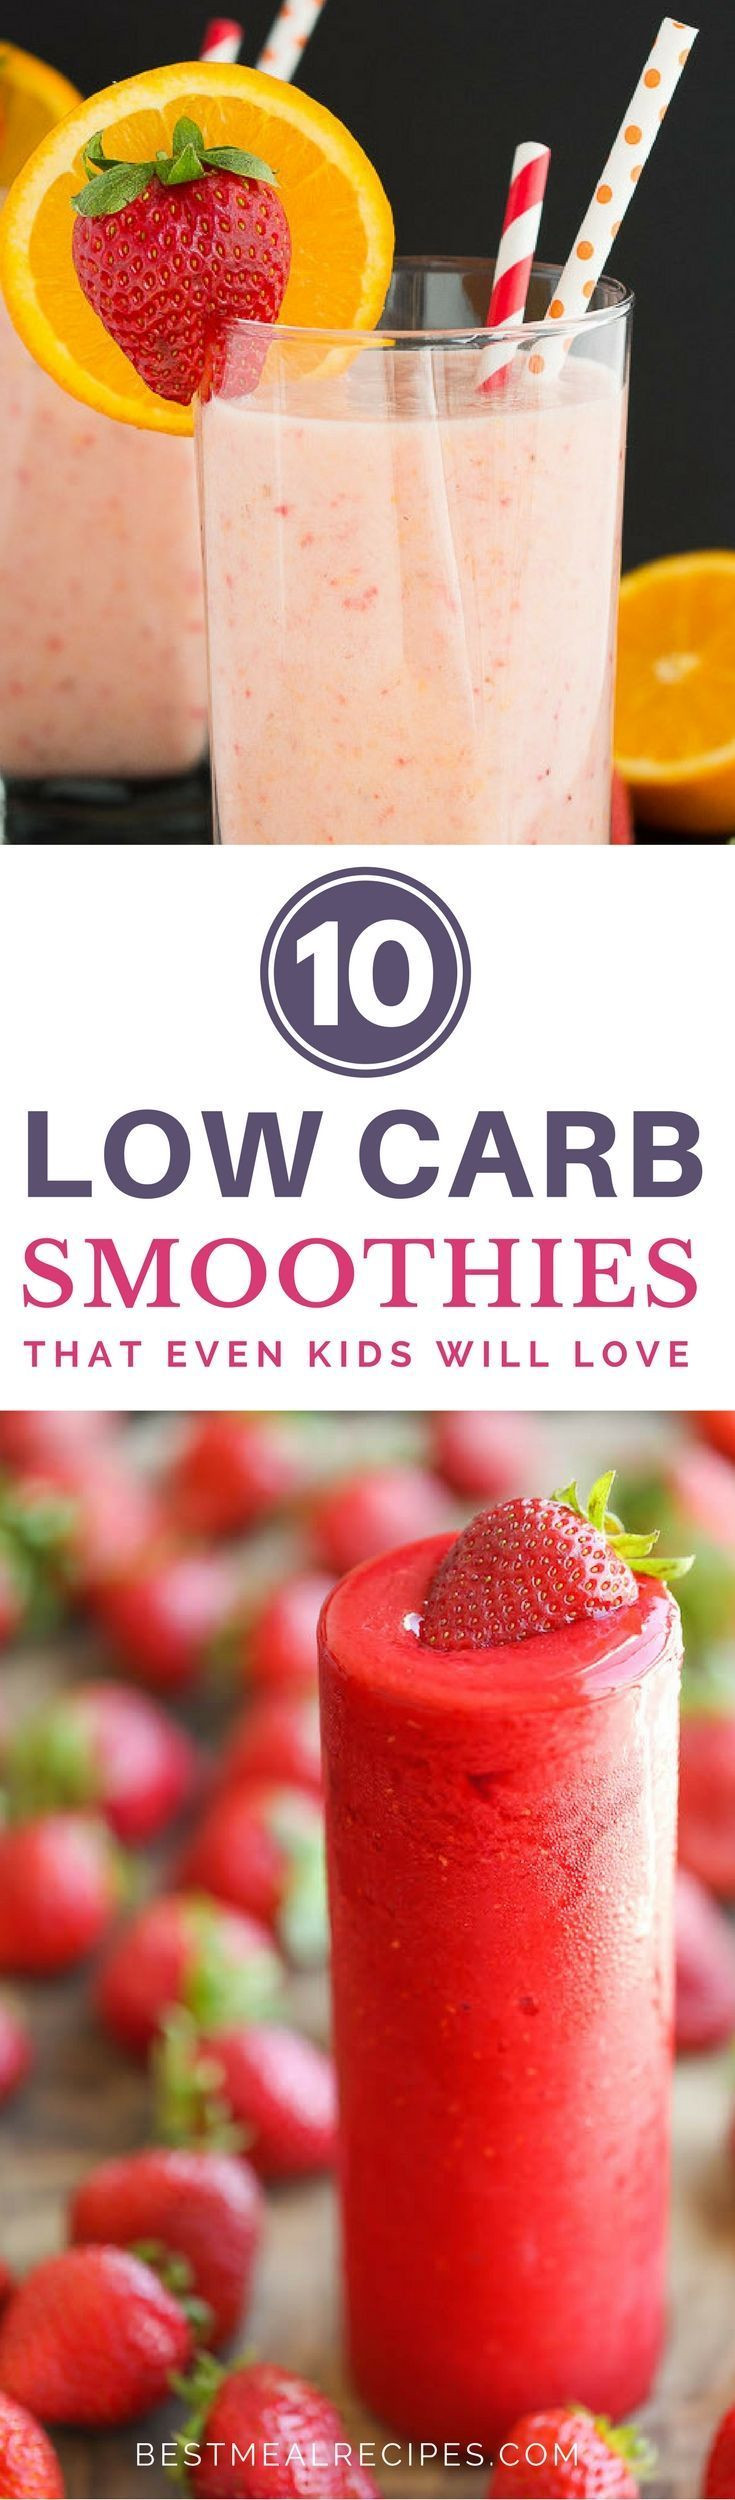 Low Carb Fruit Smoothies
 276 best Low Carb Beverages Keto